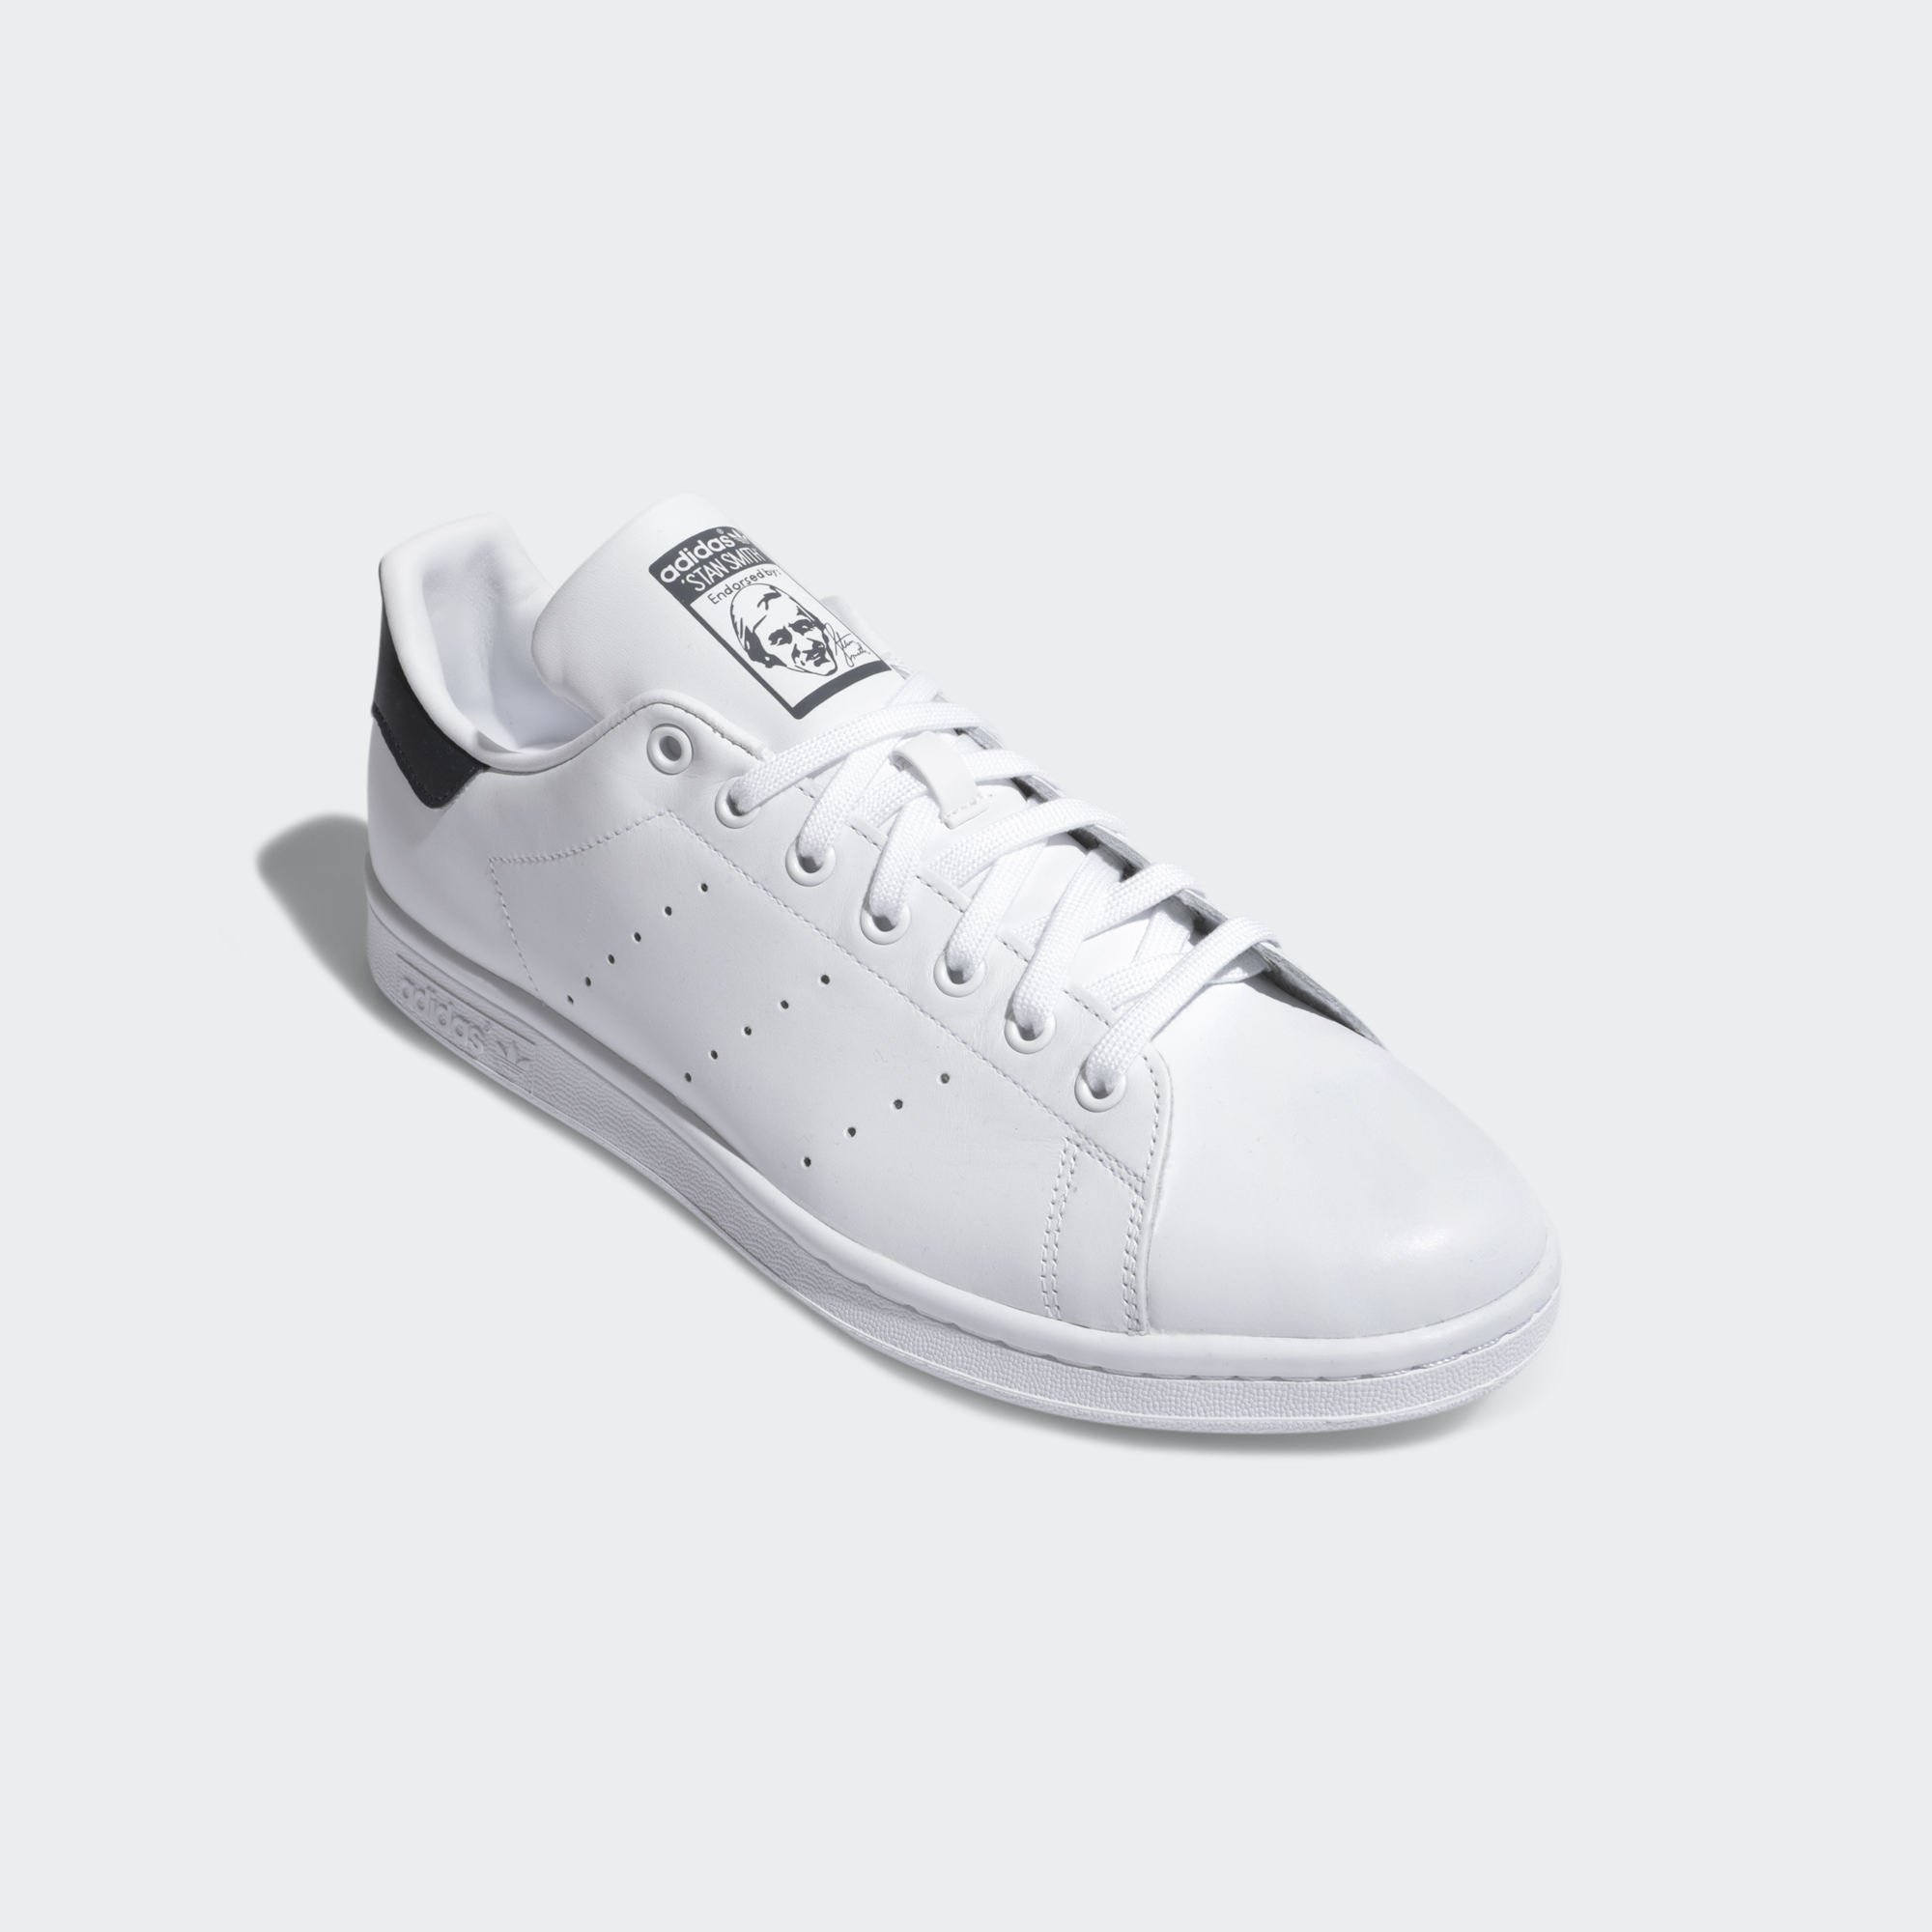 STAN SMITH SHOES - CWHITE/CWHITE/DKBLUE | MEN,WOMEN | adidas Hong Kong  Official Online Store